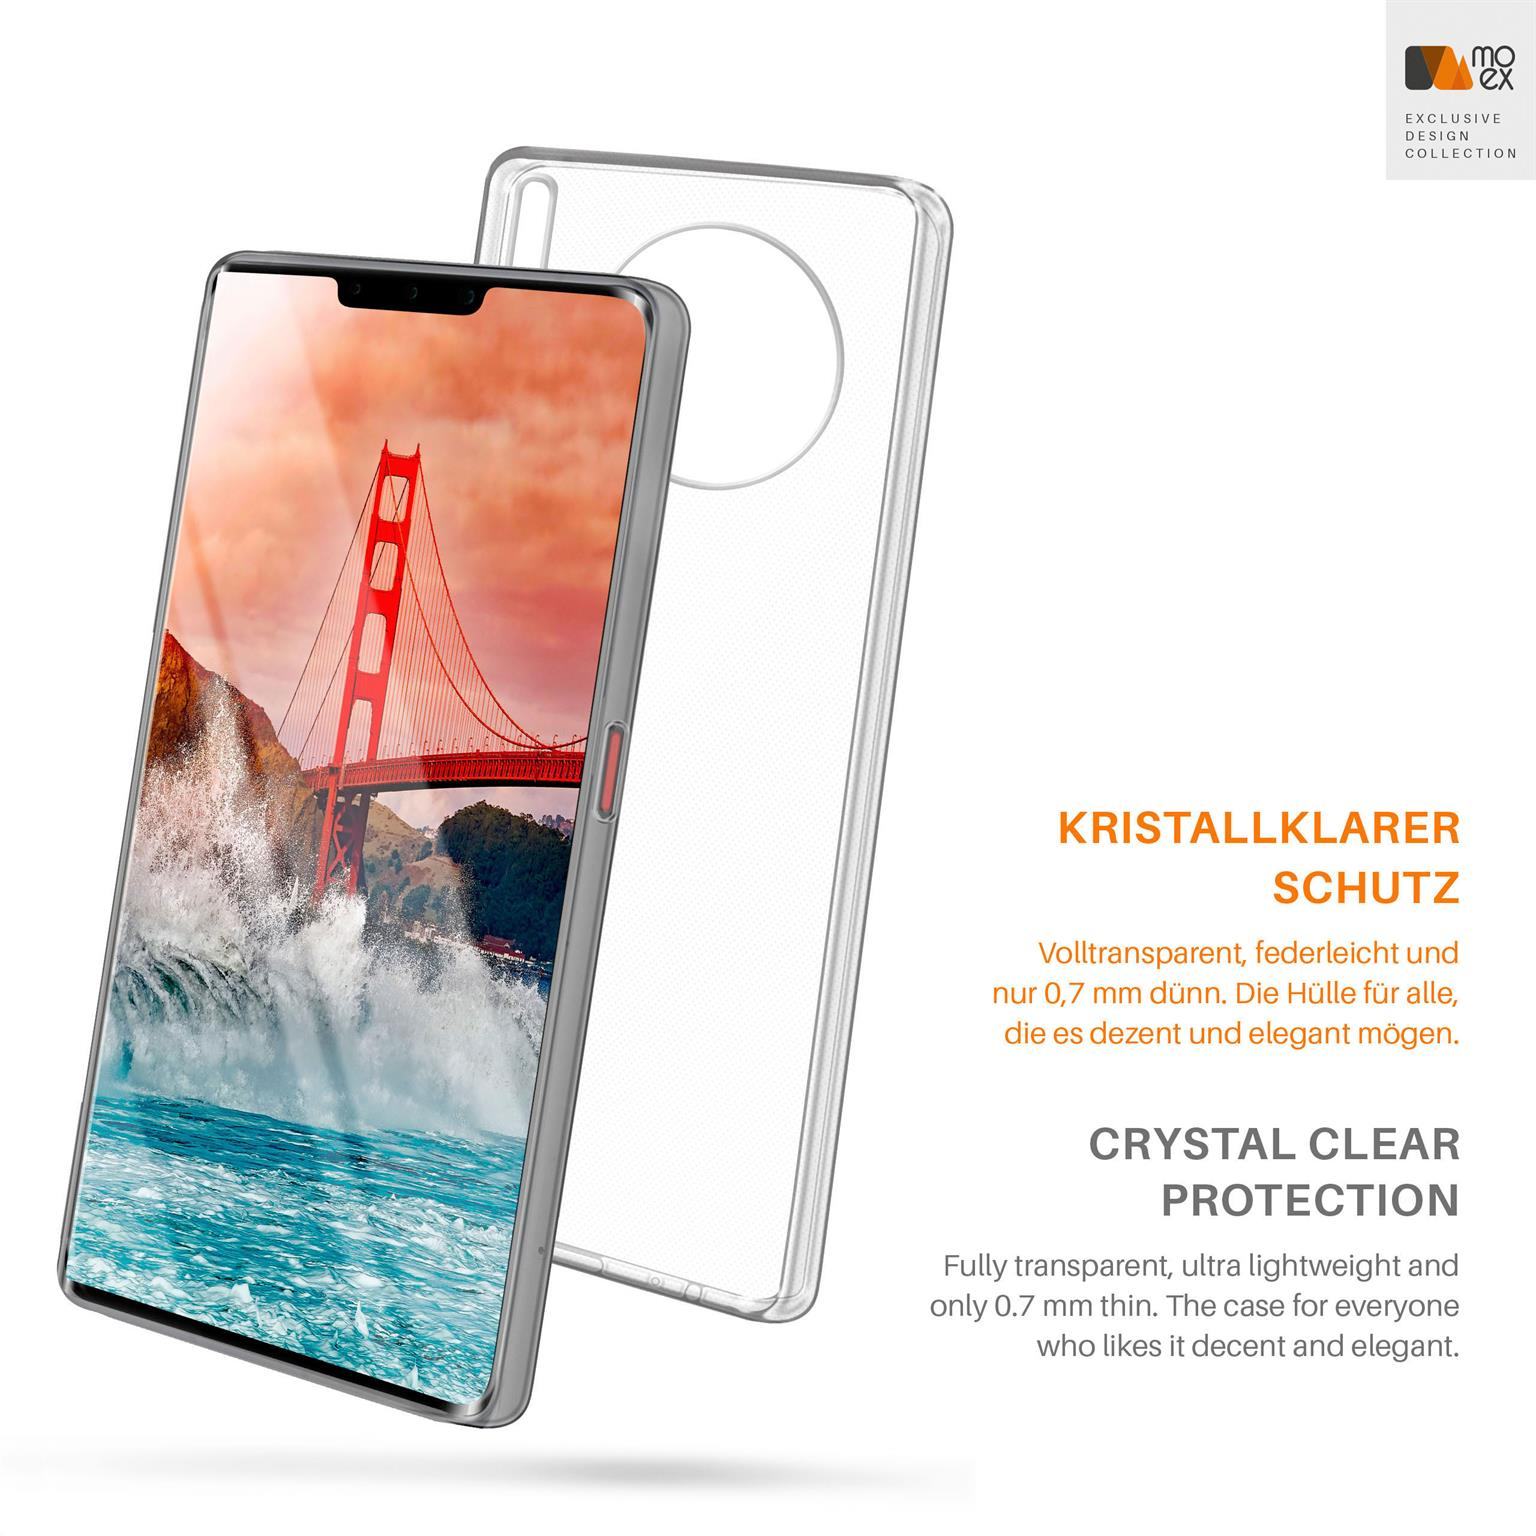 Backcover, Huawei, Aero Case, MOEX 30 Crystal-Clear Mate Pro,